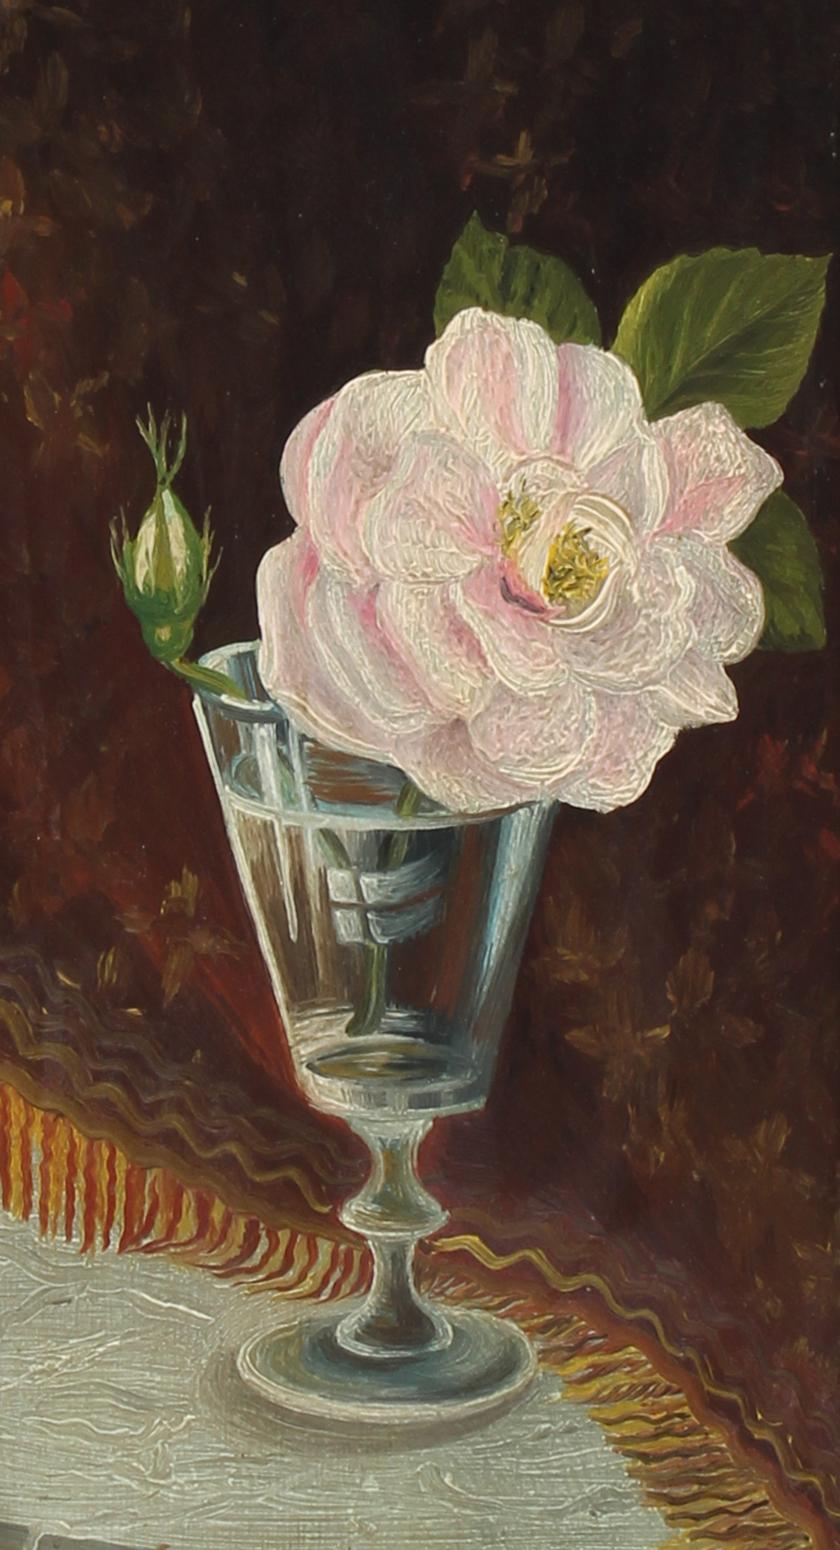 A sweet antique American still life painting on wood depicting a large pink flower in a clear vase.

This charming work comes in a period frame.  